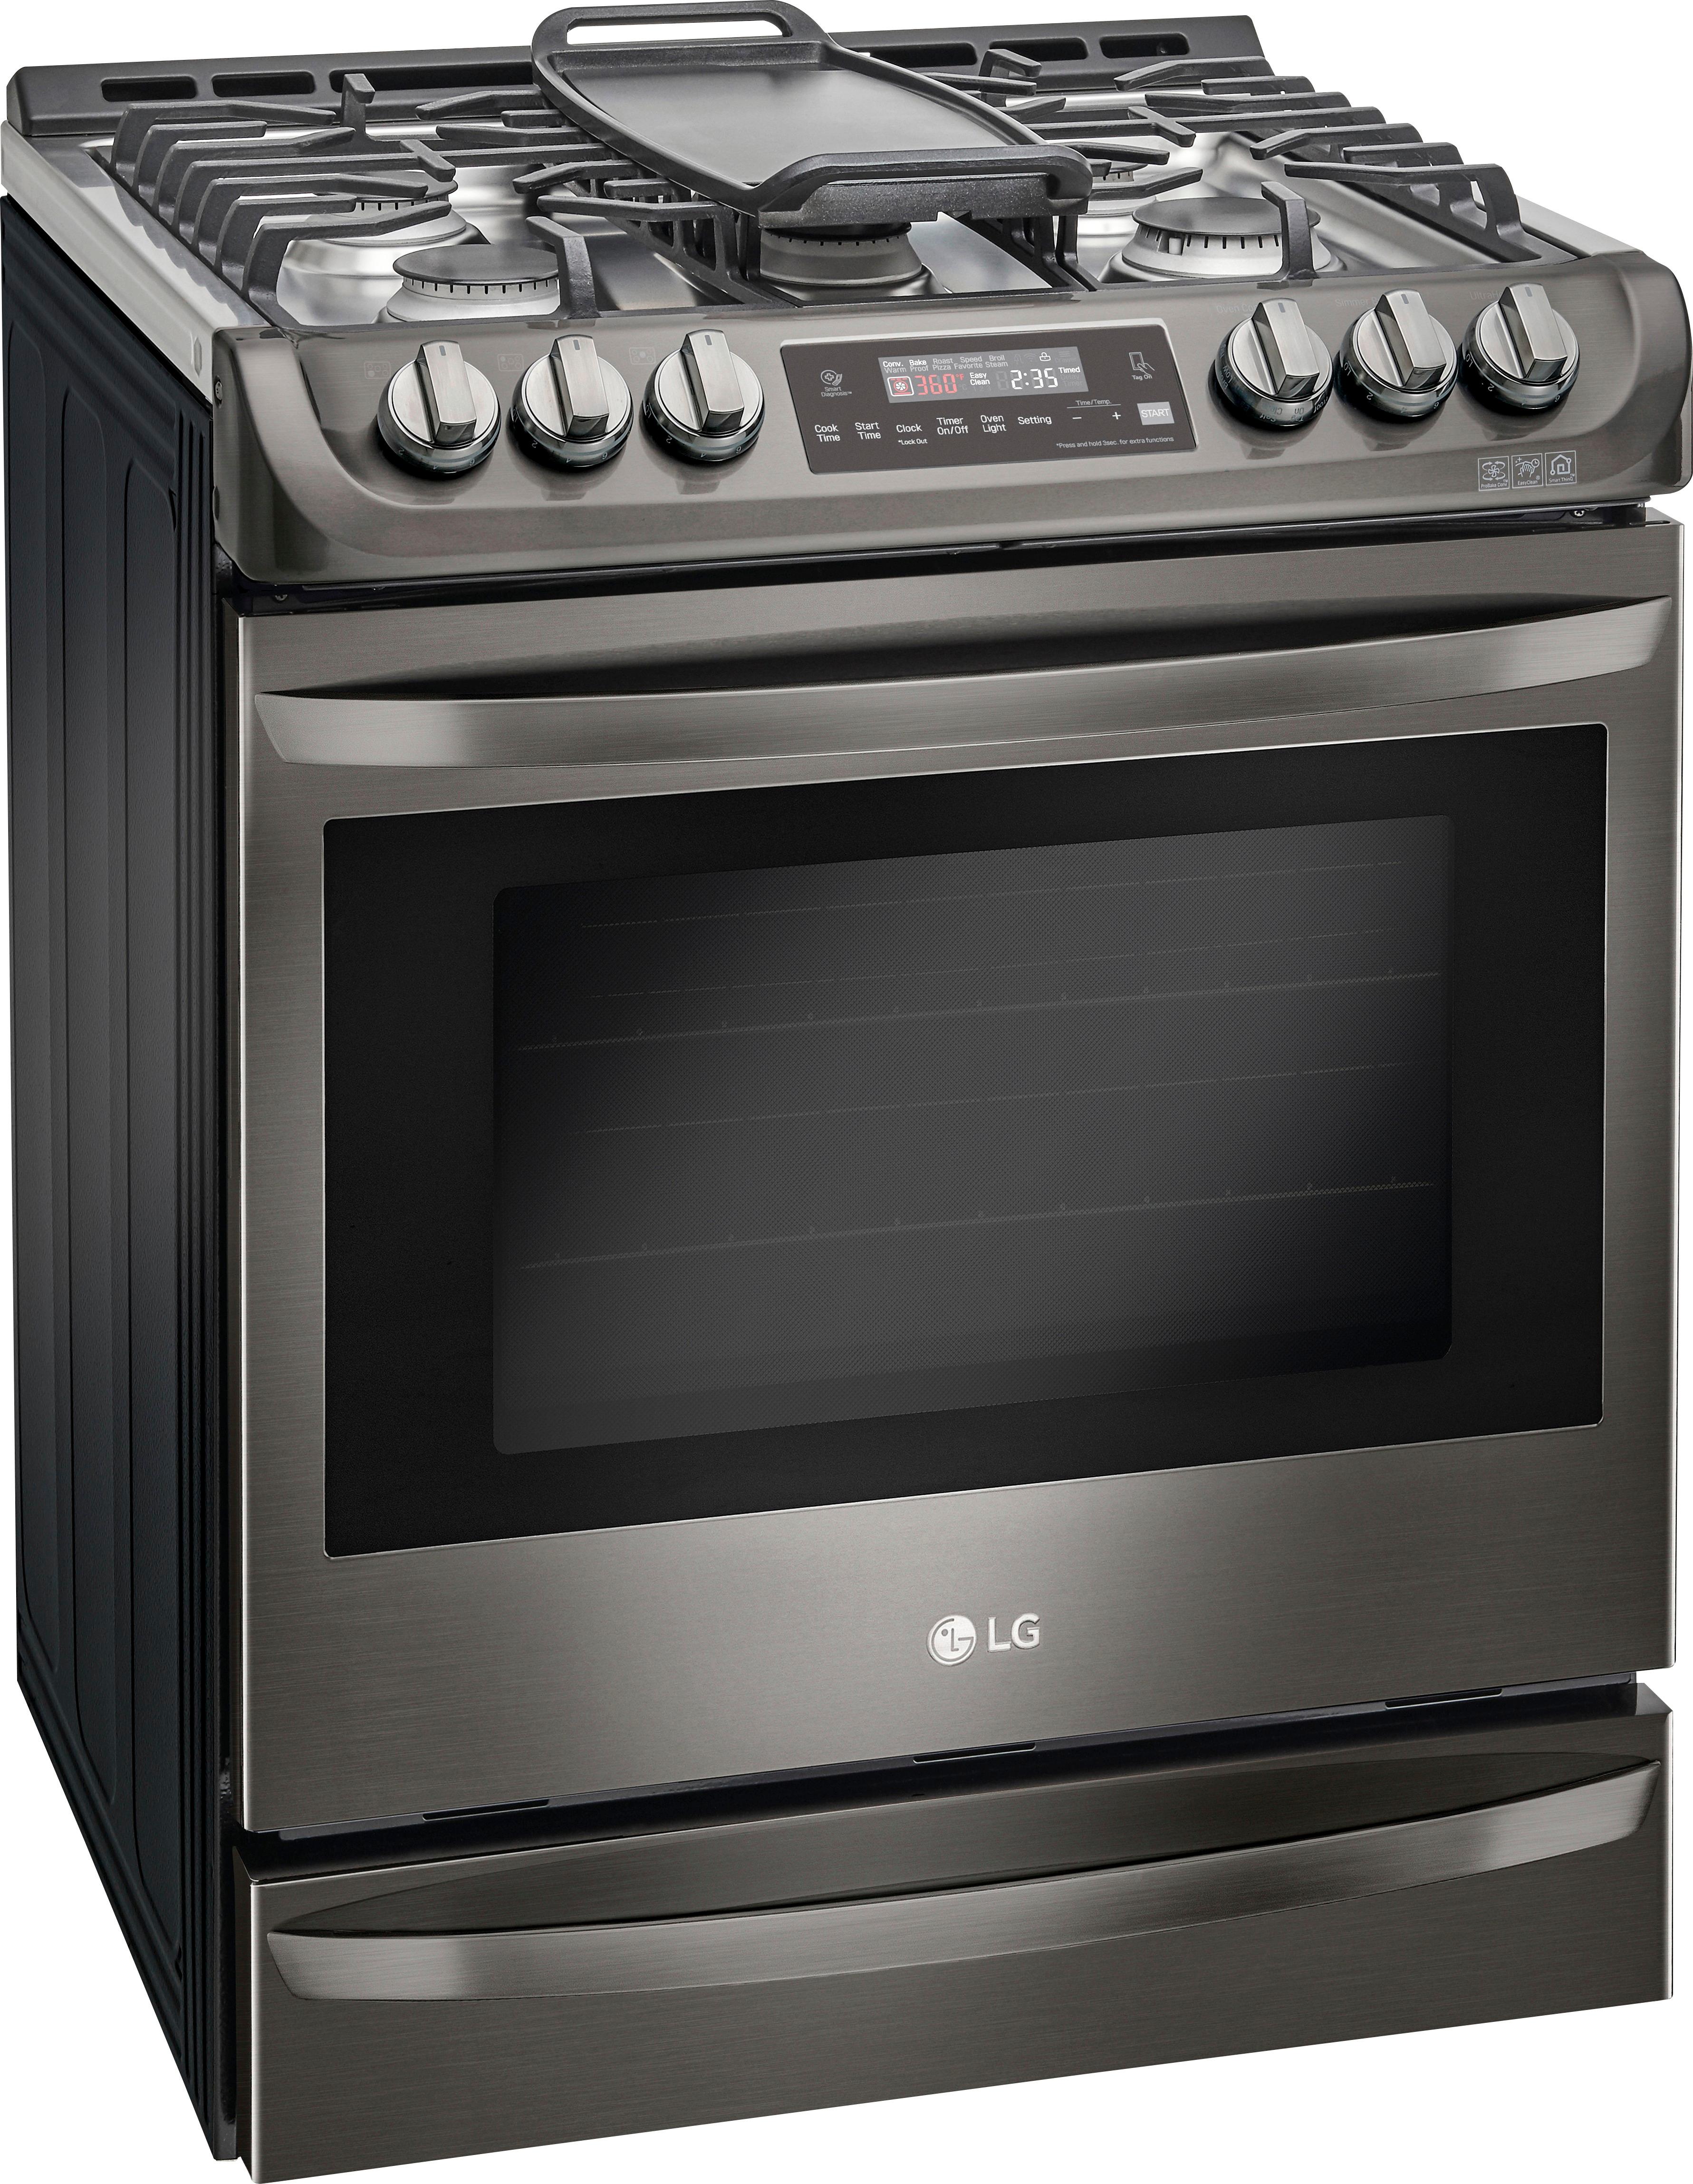 Angle View: LG - 6.3 Cu. Ft. Self-Cleaning Slide-In Gas Range with ProBake Convection - Black stainless steel